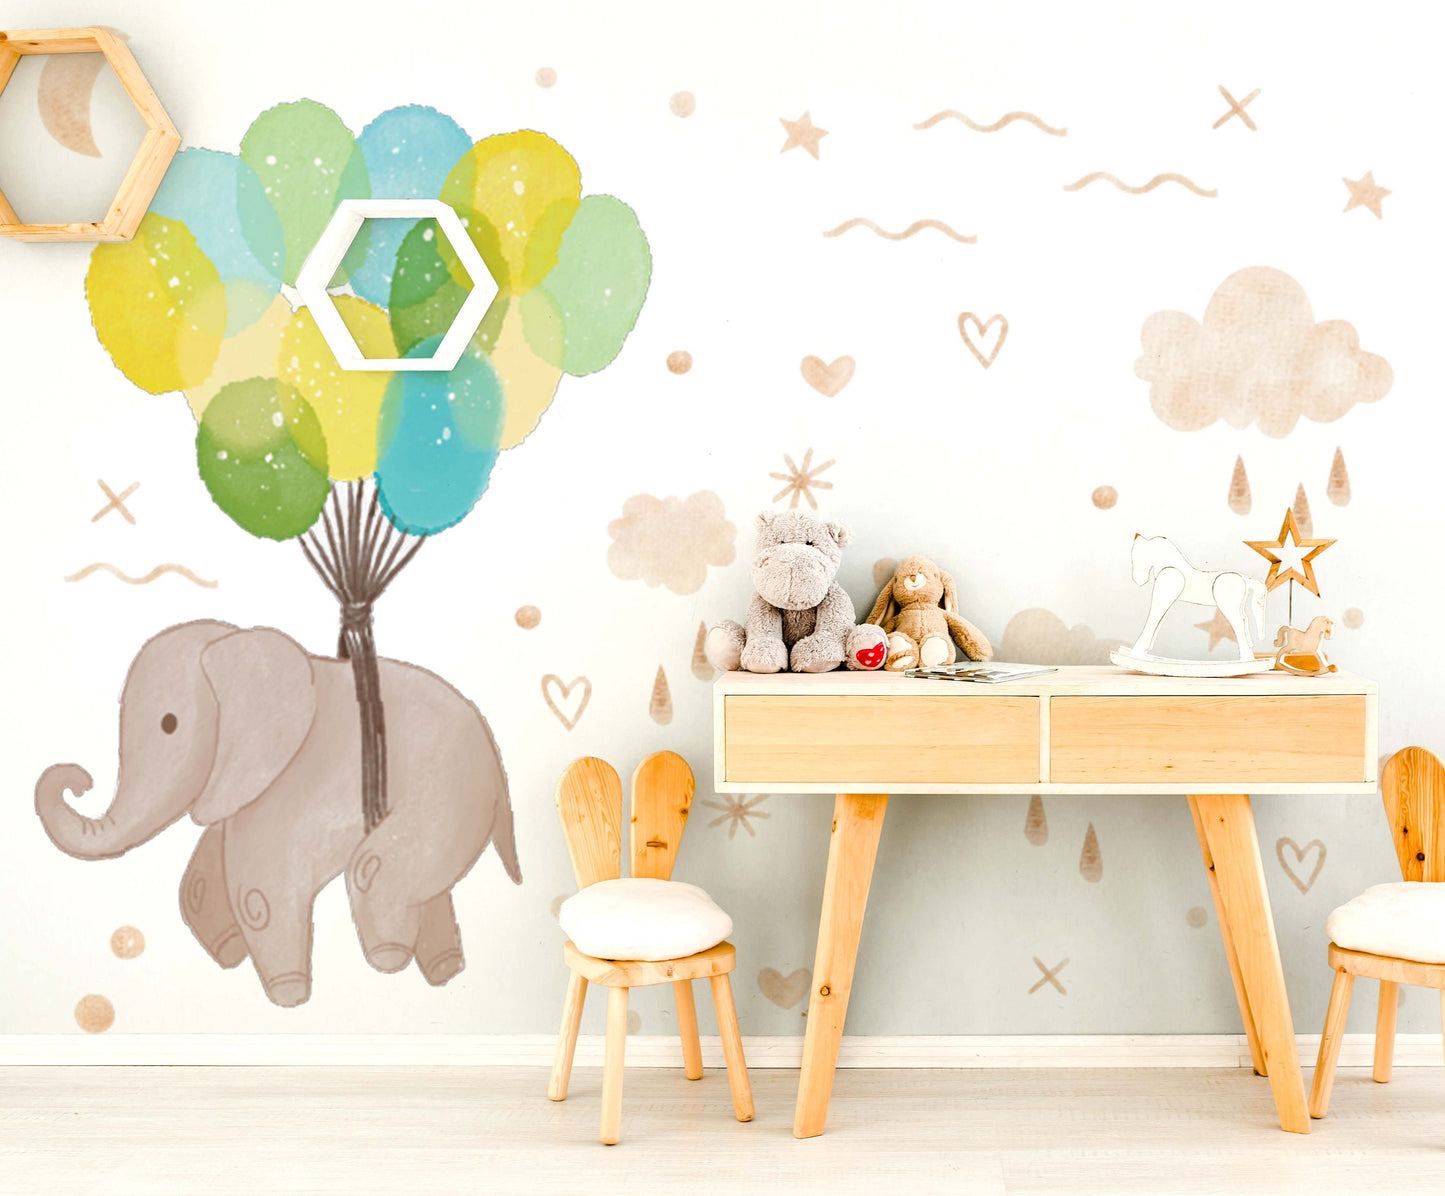 Elephant Balloons Wall Decal Clouds Moon Heart Stars Stickers, LF255